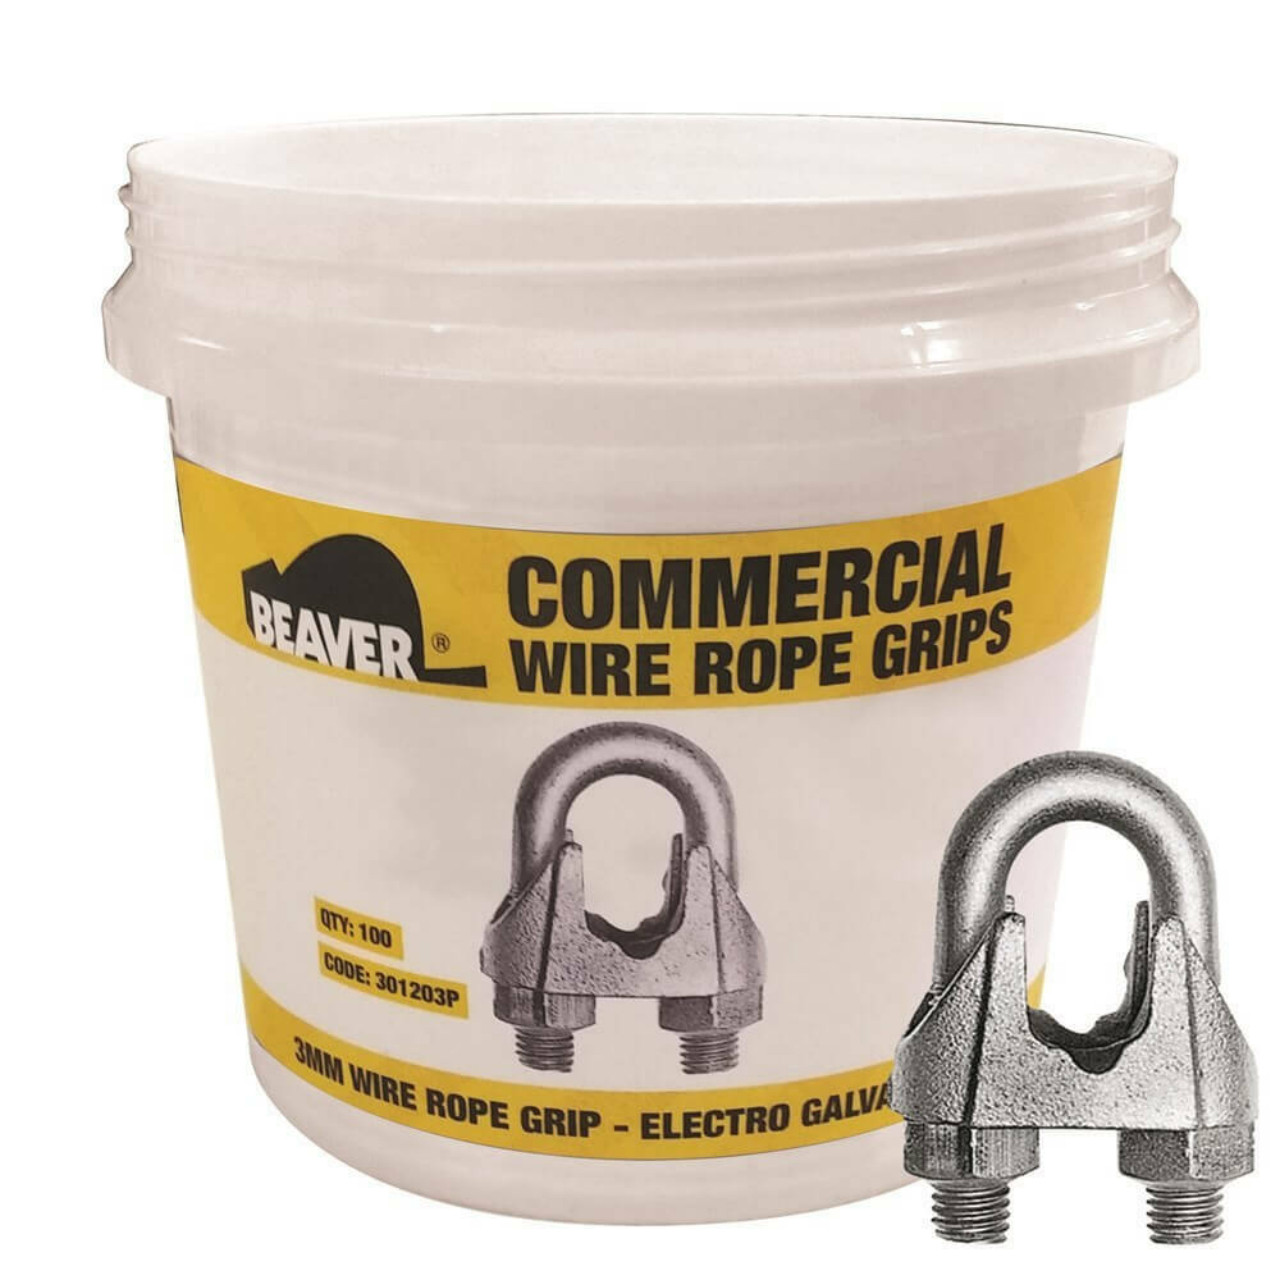 Beaver Commercial Galvanised Wire Rope Grips 6mm Cable 50/Pail